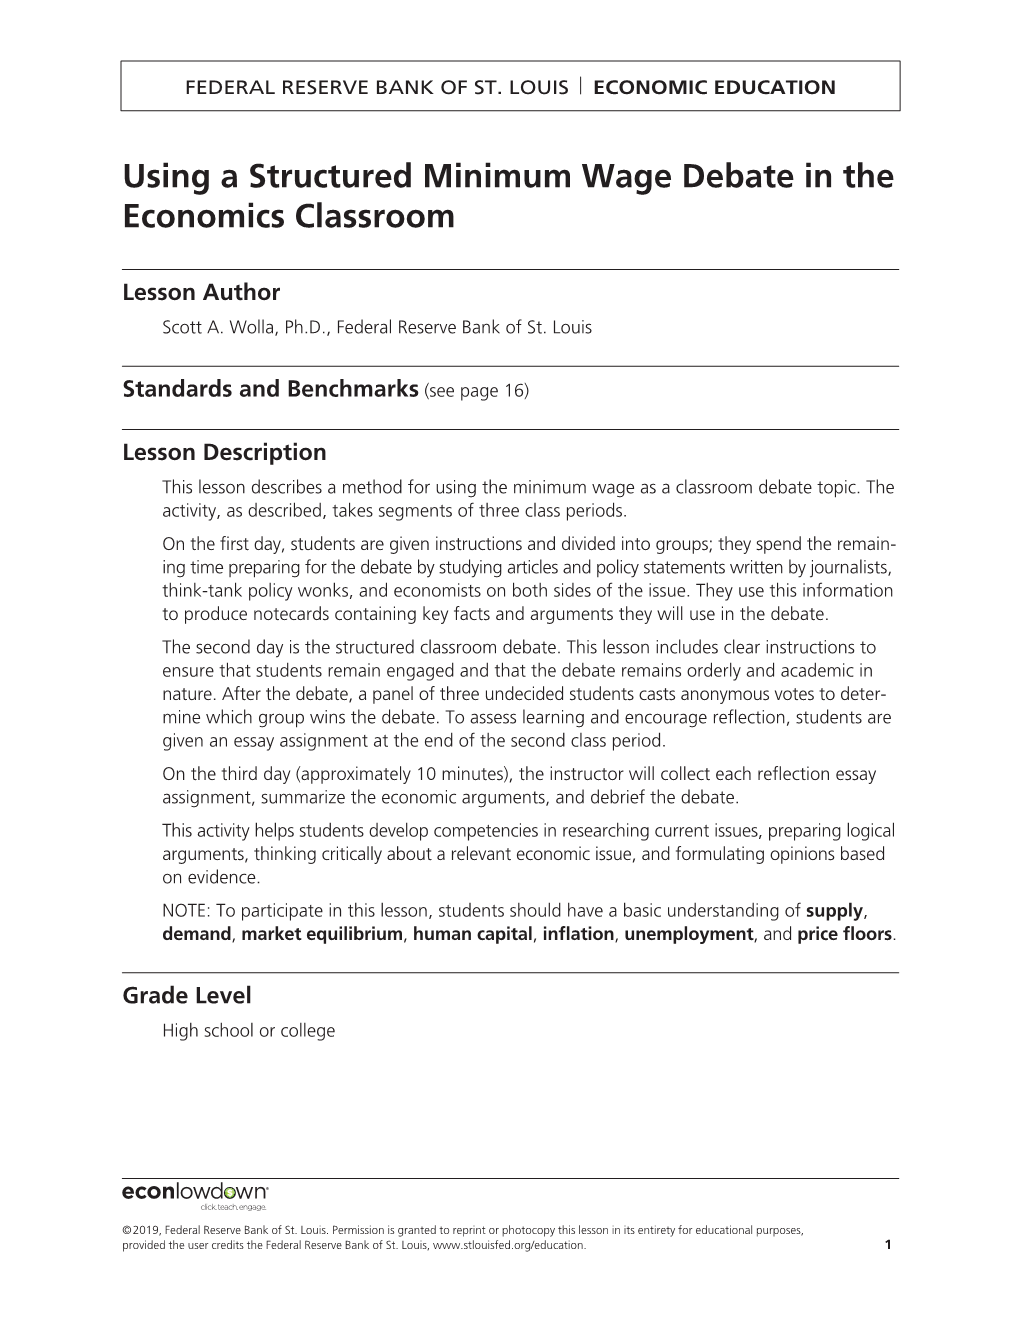 Using a Structured Minimum Wage Debate in the Economics Classroom